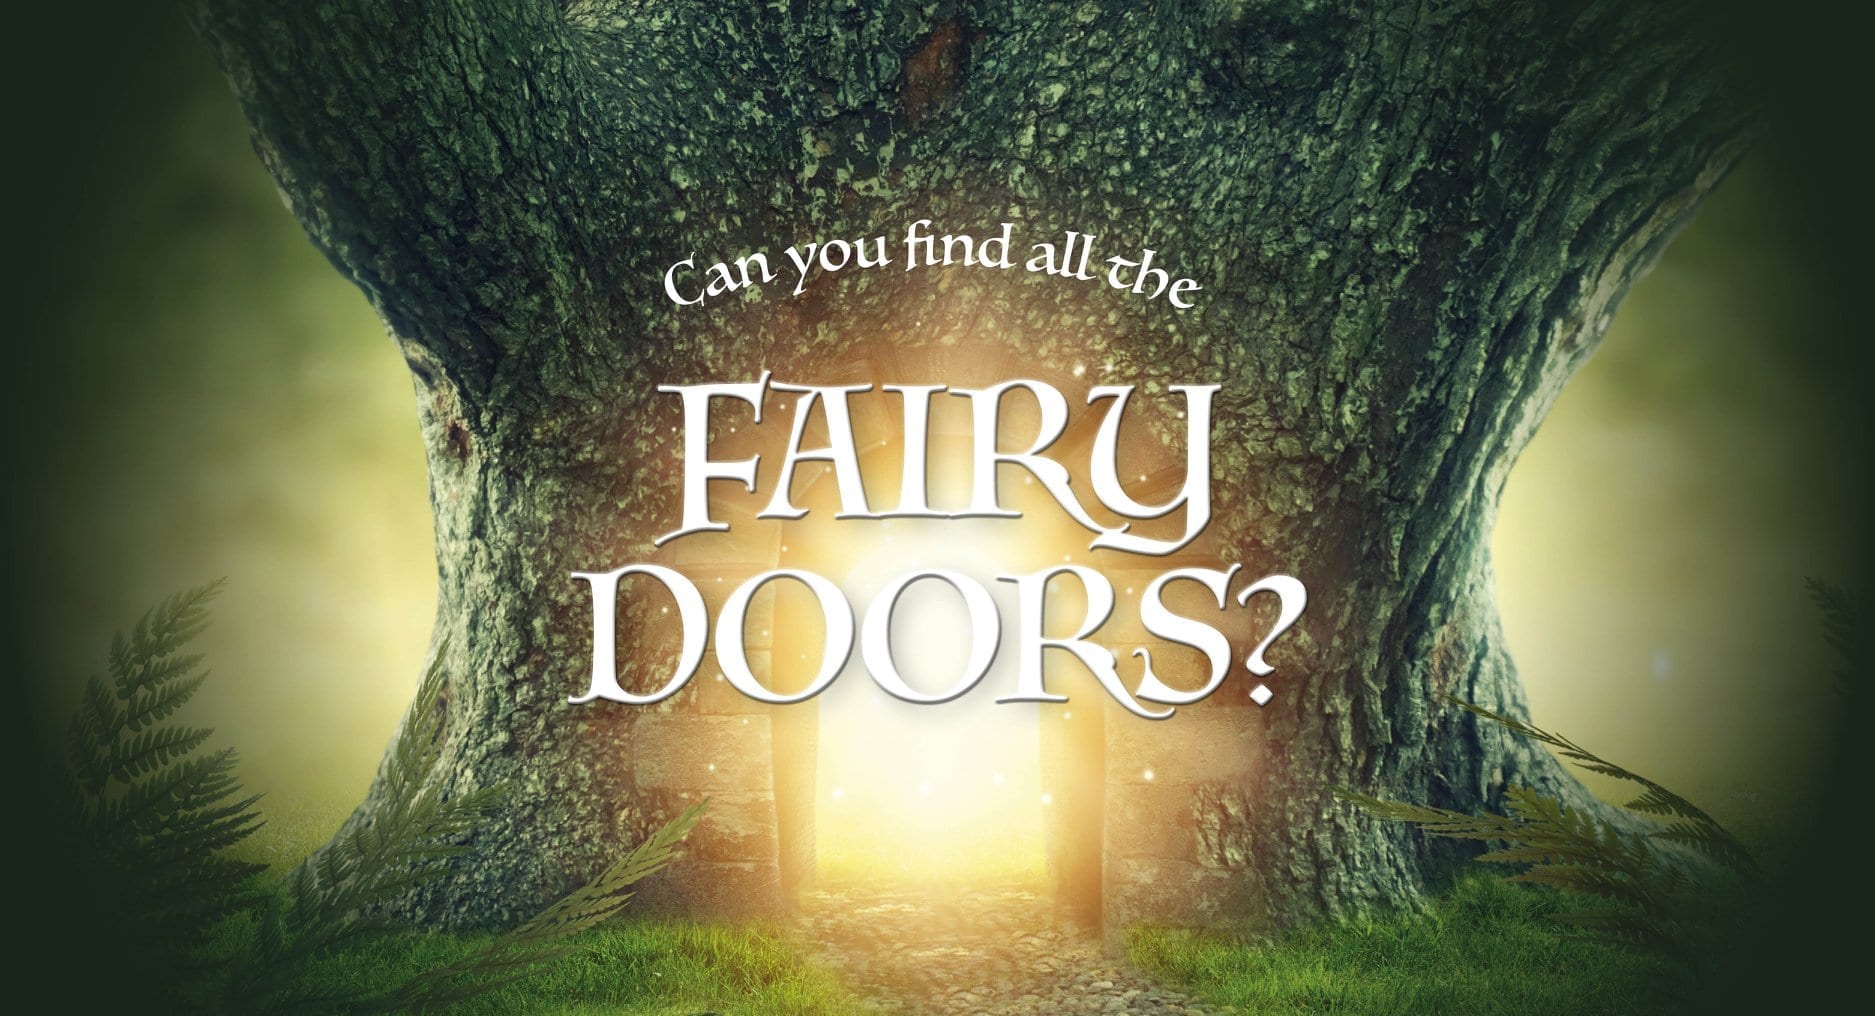 Can you find the Fairy Doors?